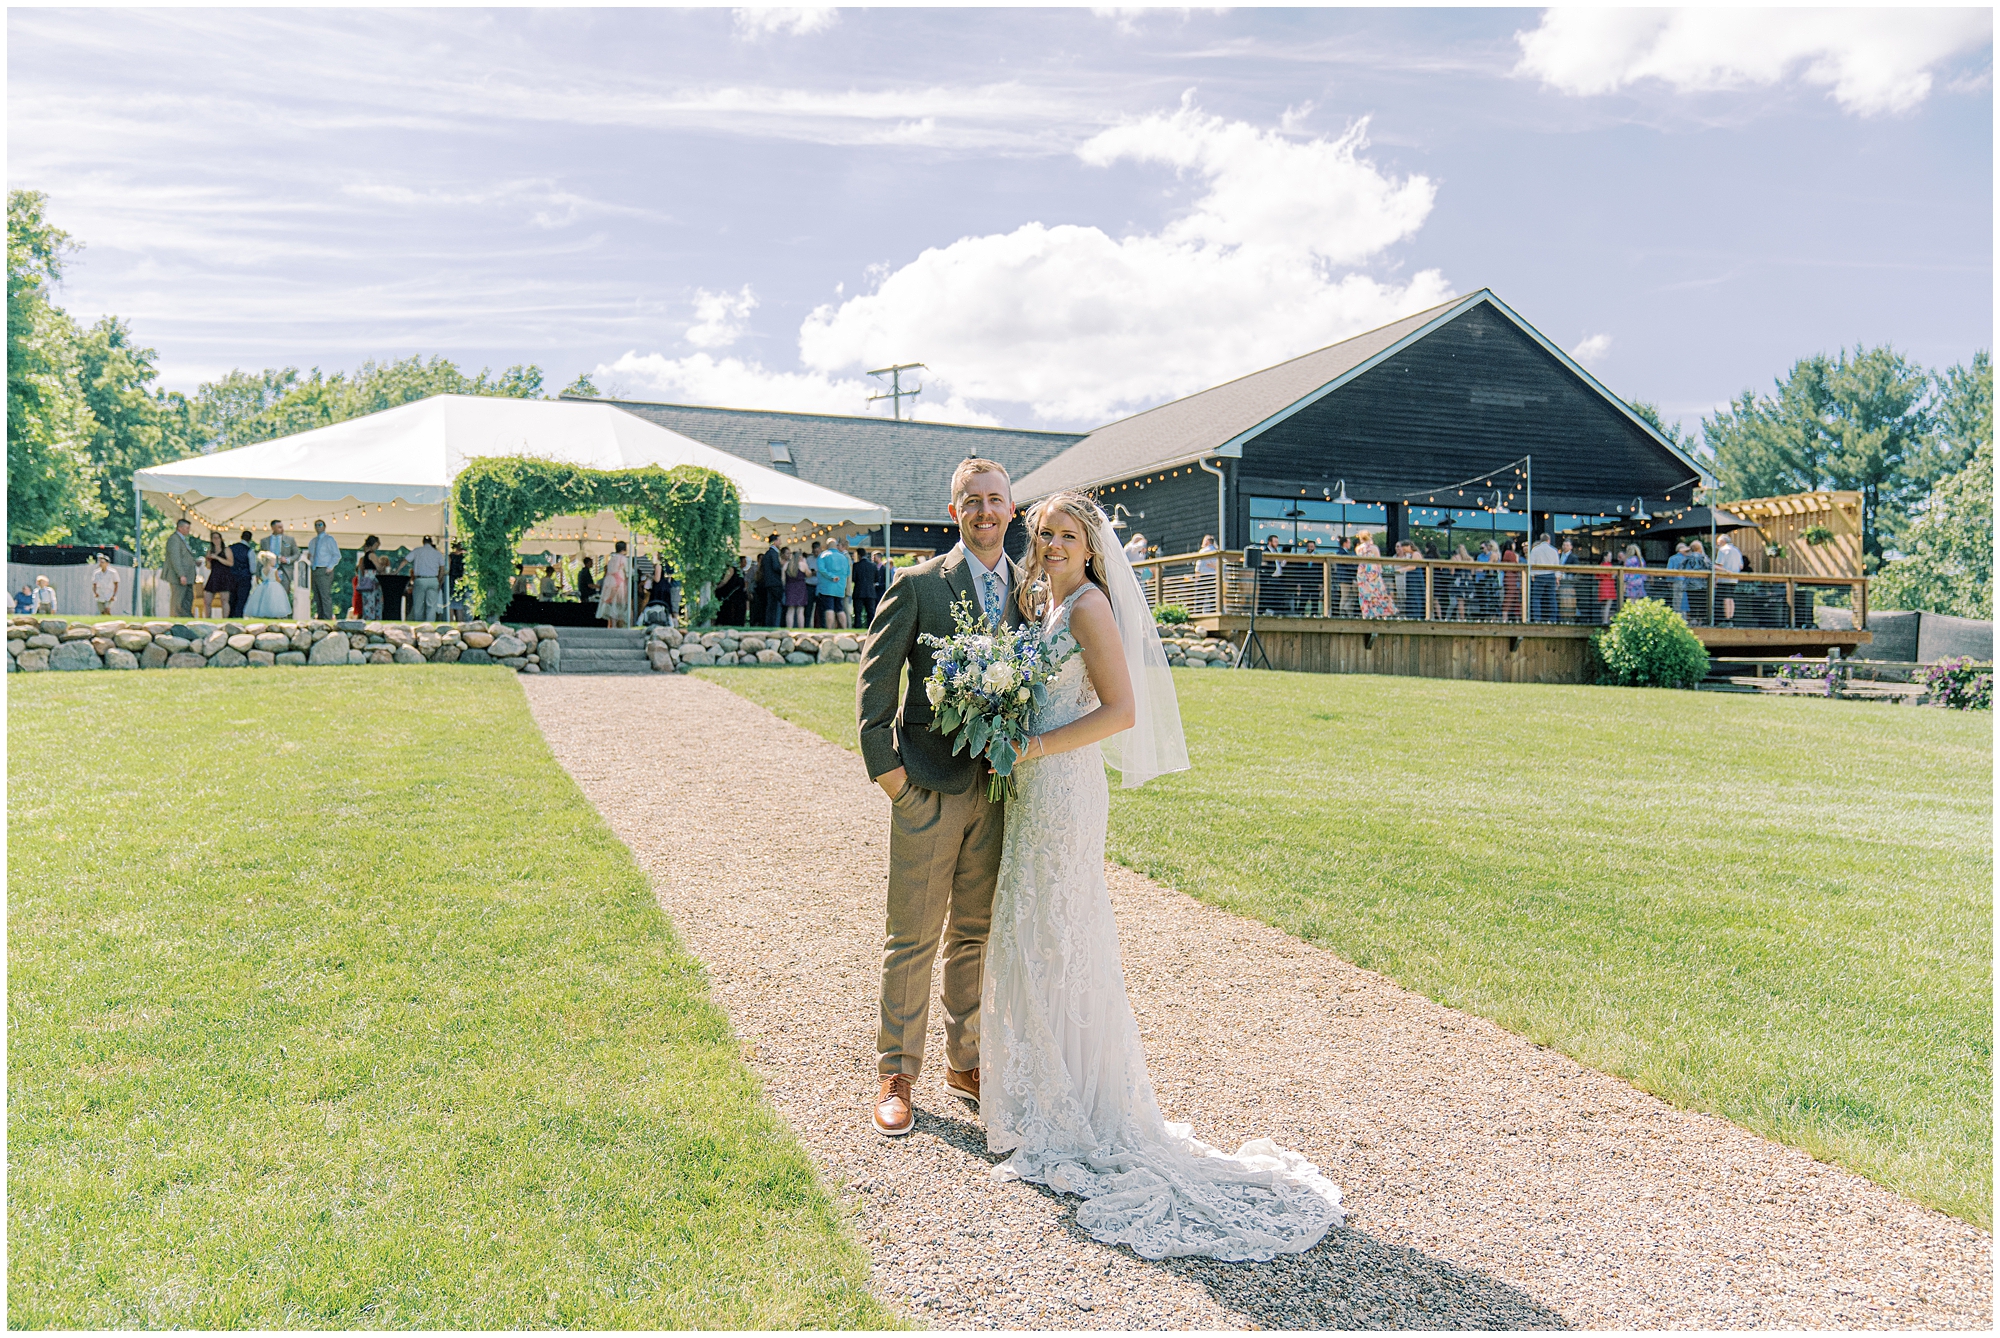 bride and groom pose outside wedding venue planned by Shoreline Event Design